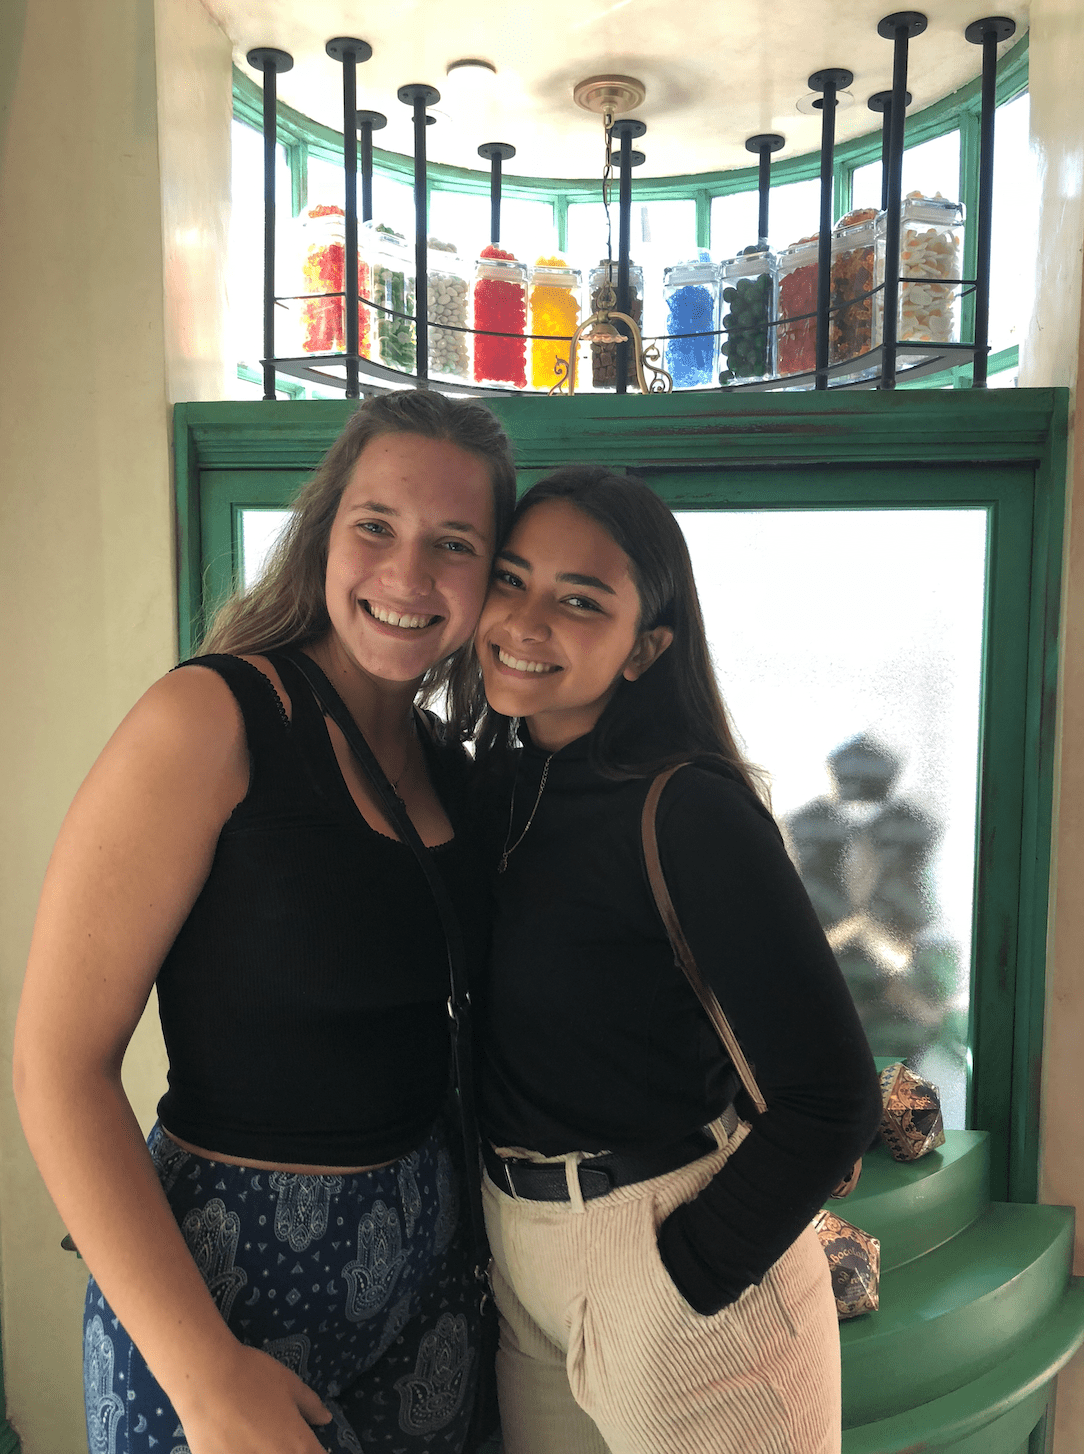 Two girls post together in front of glass display